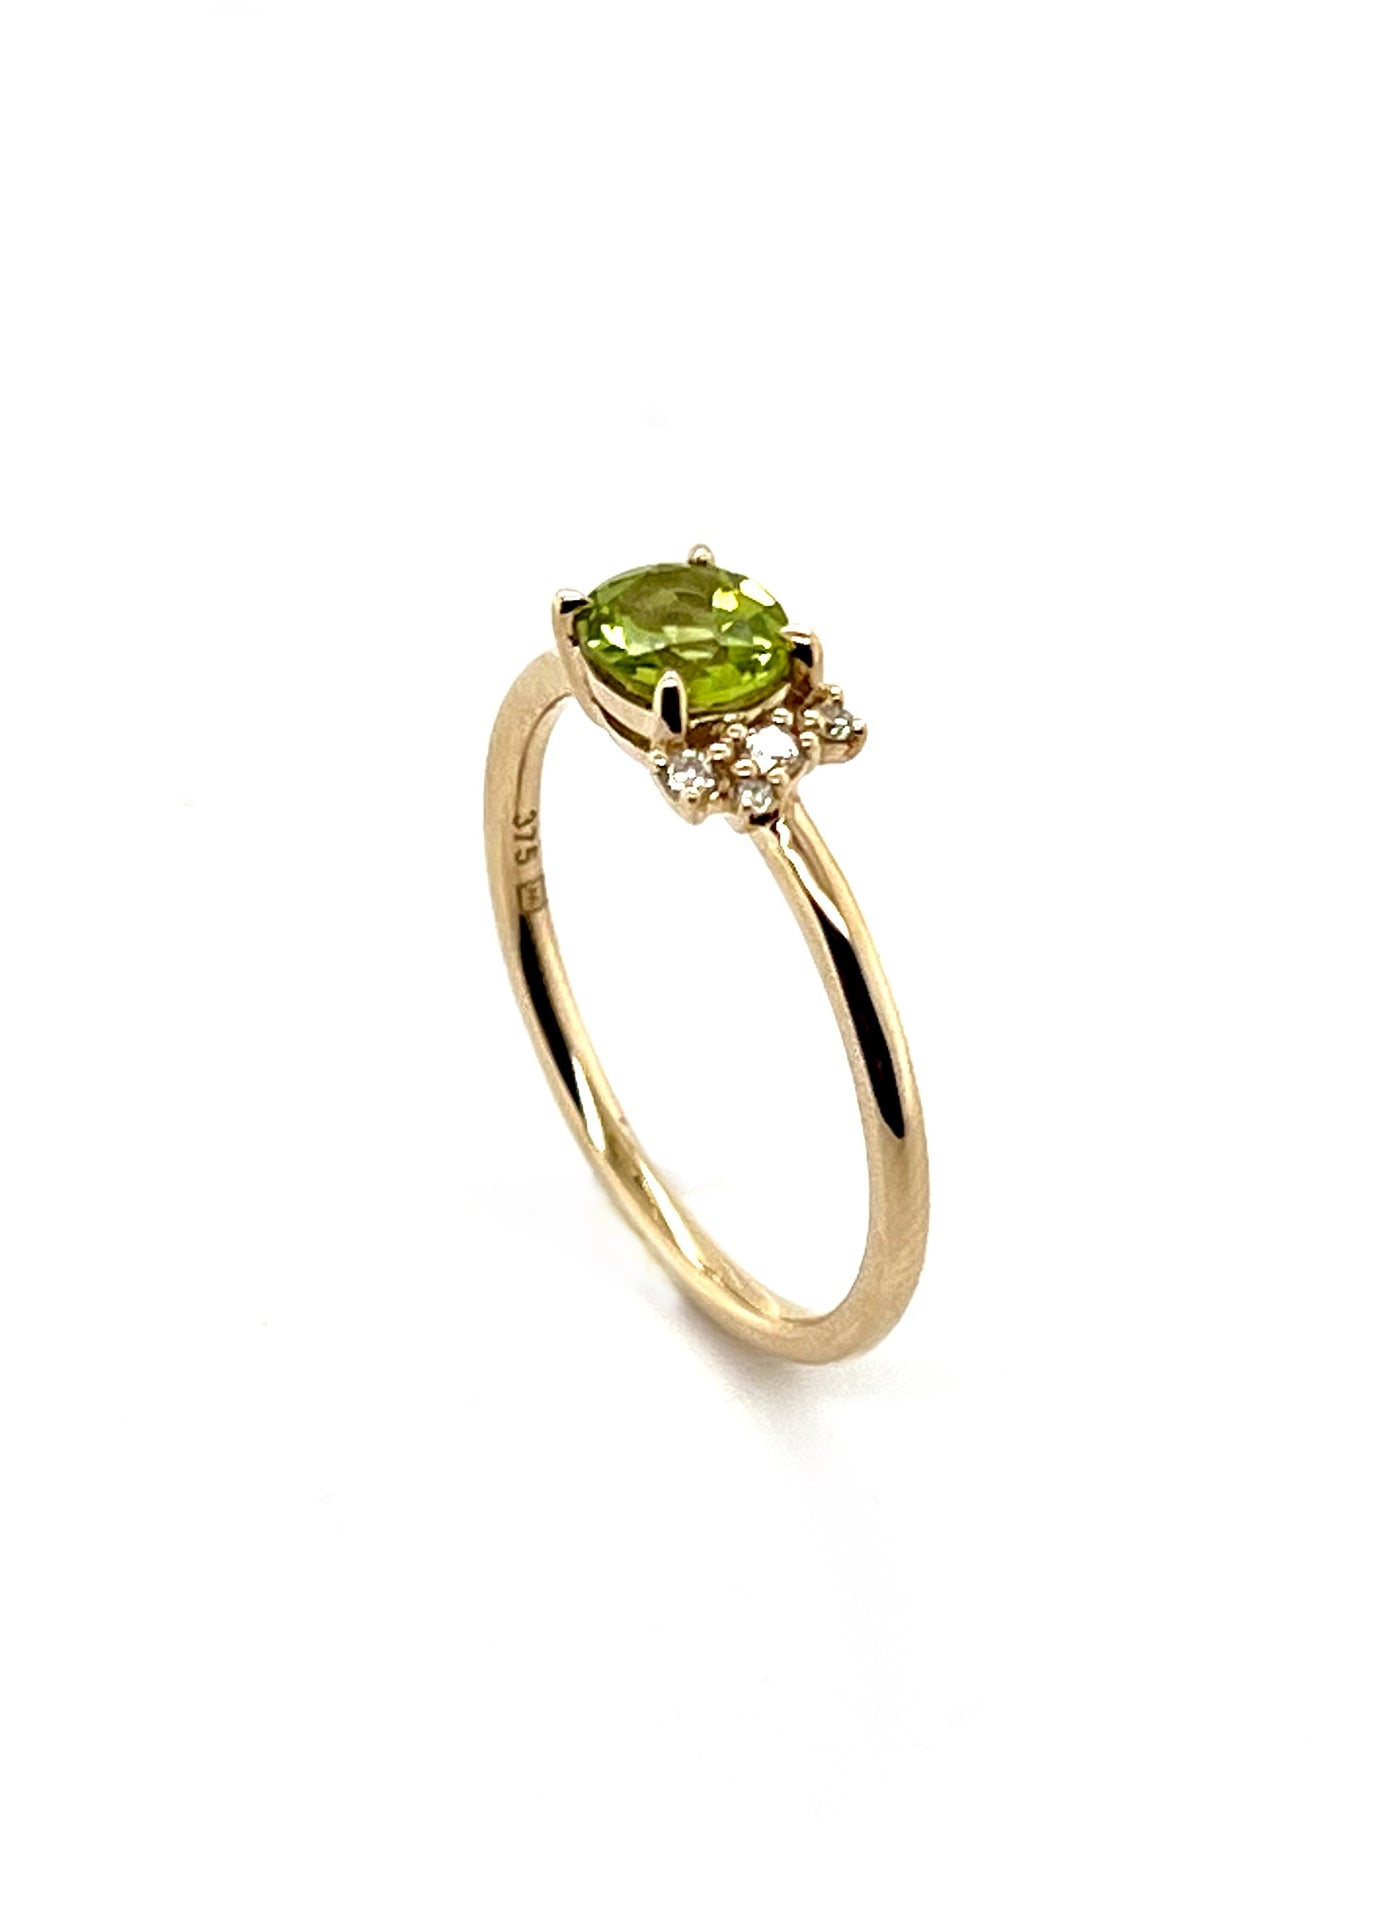 Oval Peridot Claw Set Ring